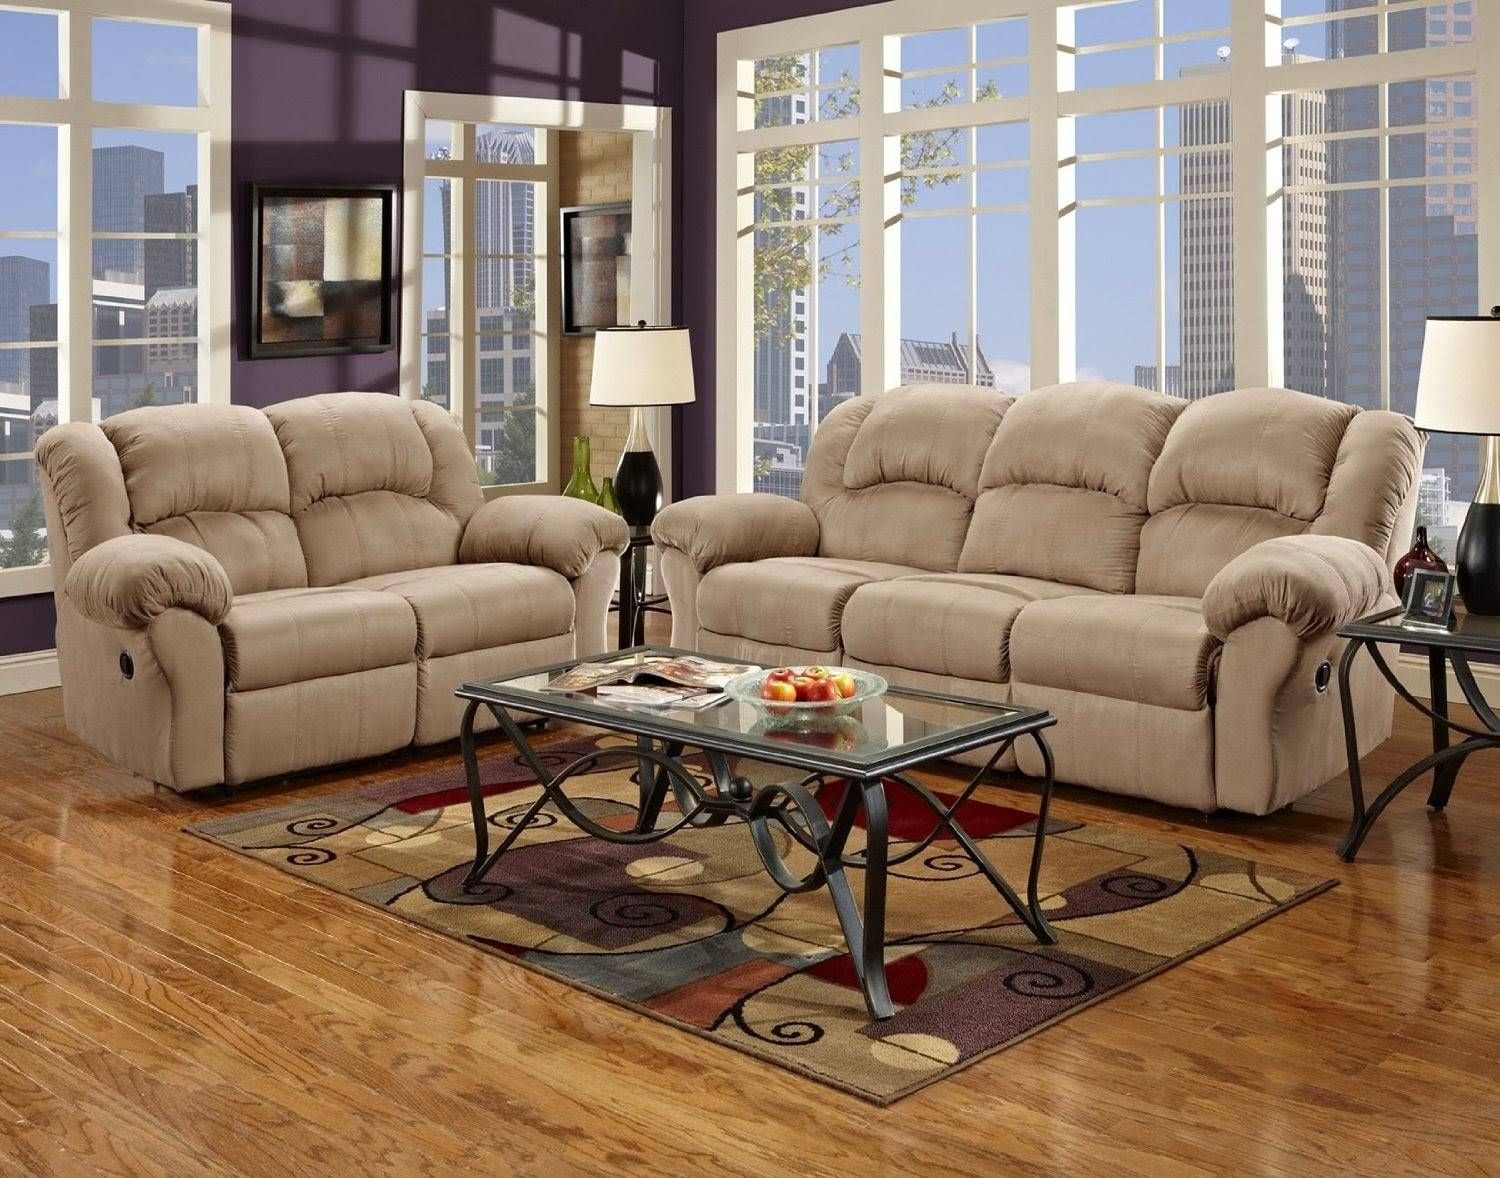 Reclining Loveseat Sale: Reclining Sofa Loveseat Set With Regard To Reclining Sofas And Loveseats Sets (View 15 of 15)